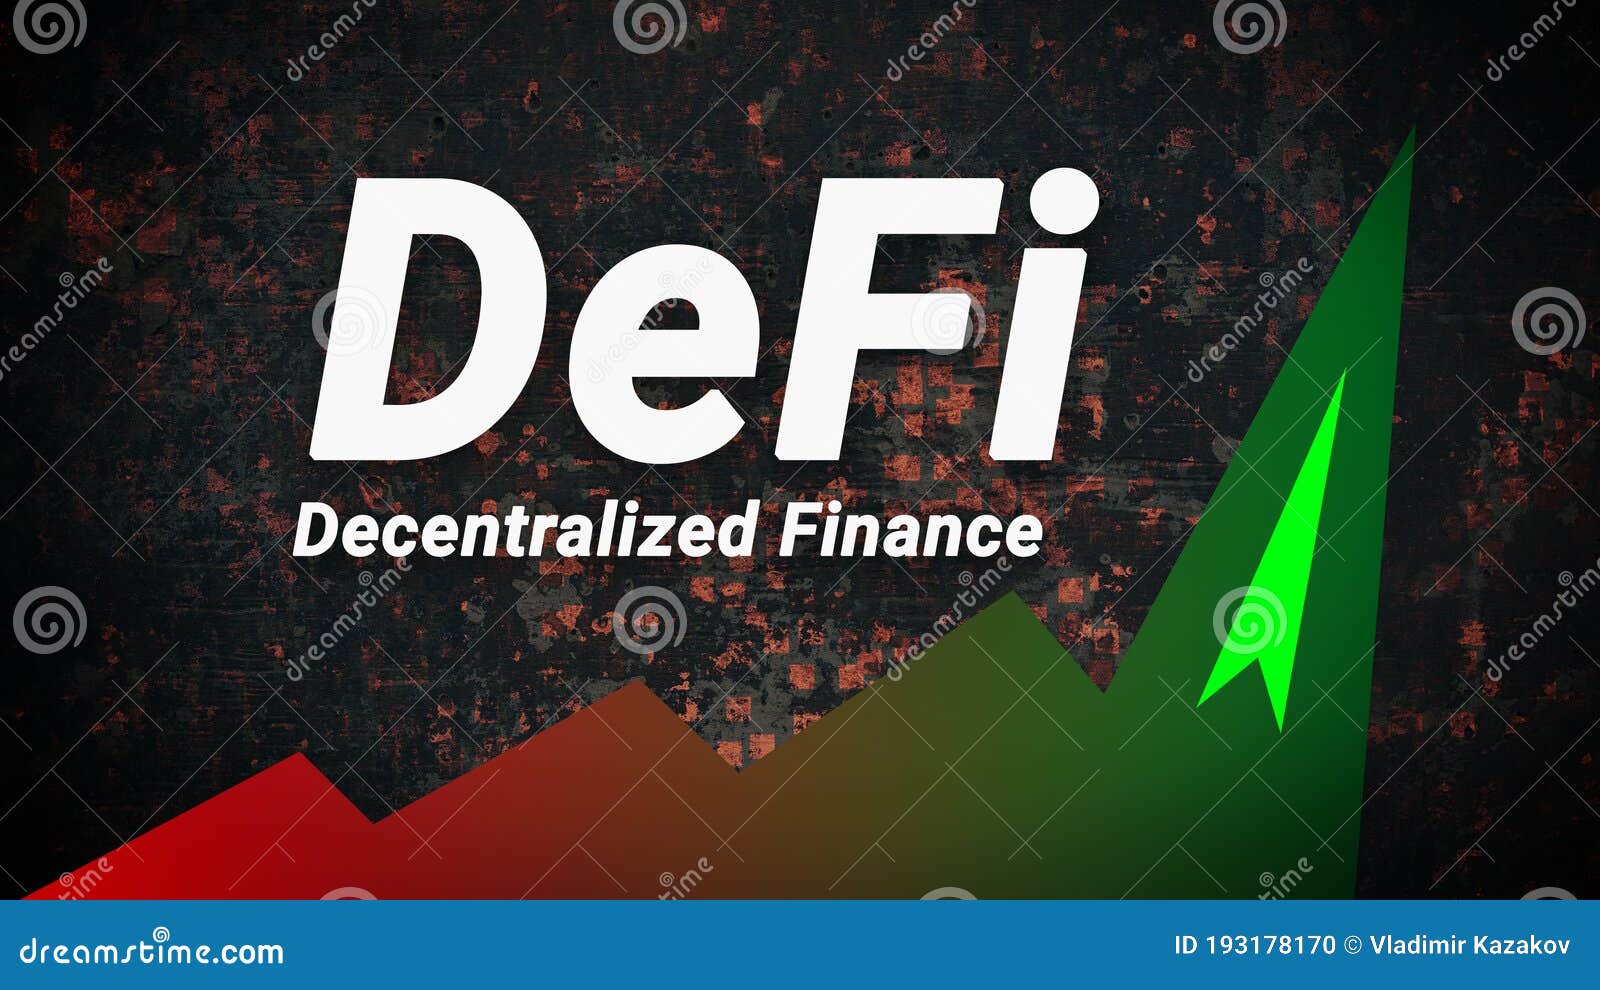 defi is a decentralized finance that is gaining popularity and hype.